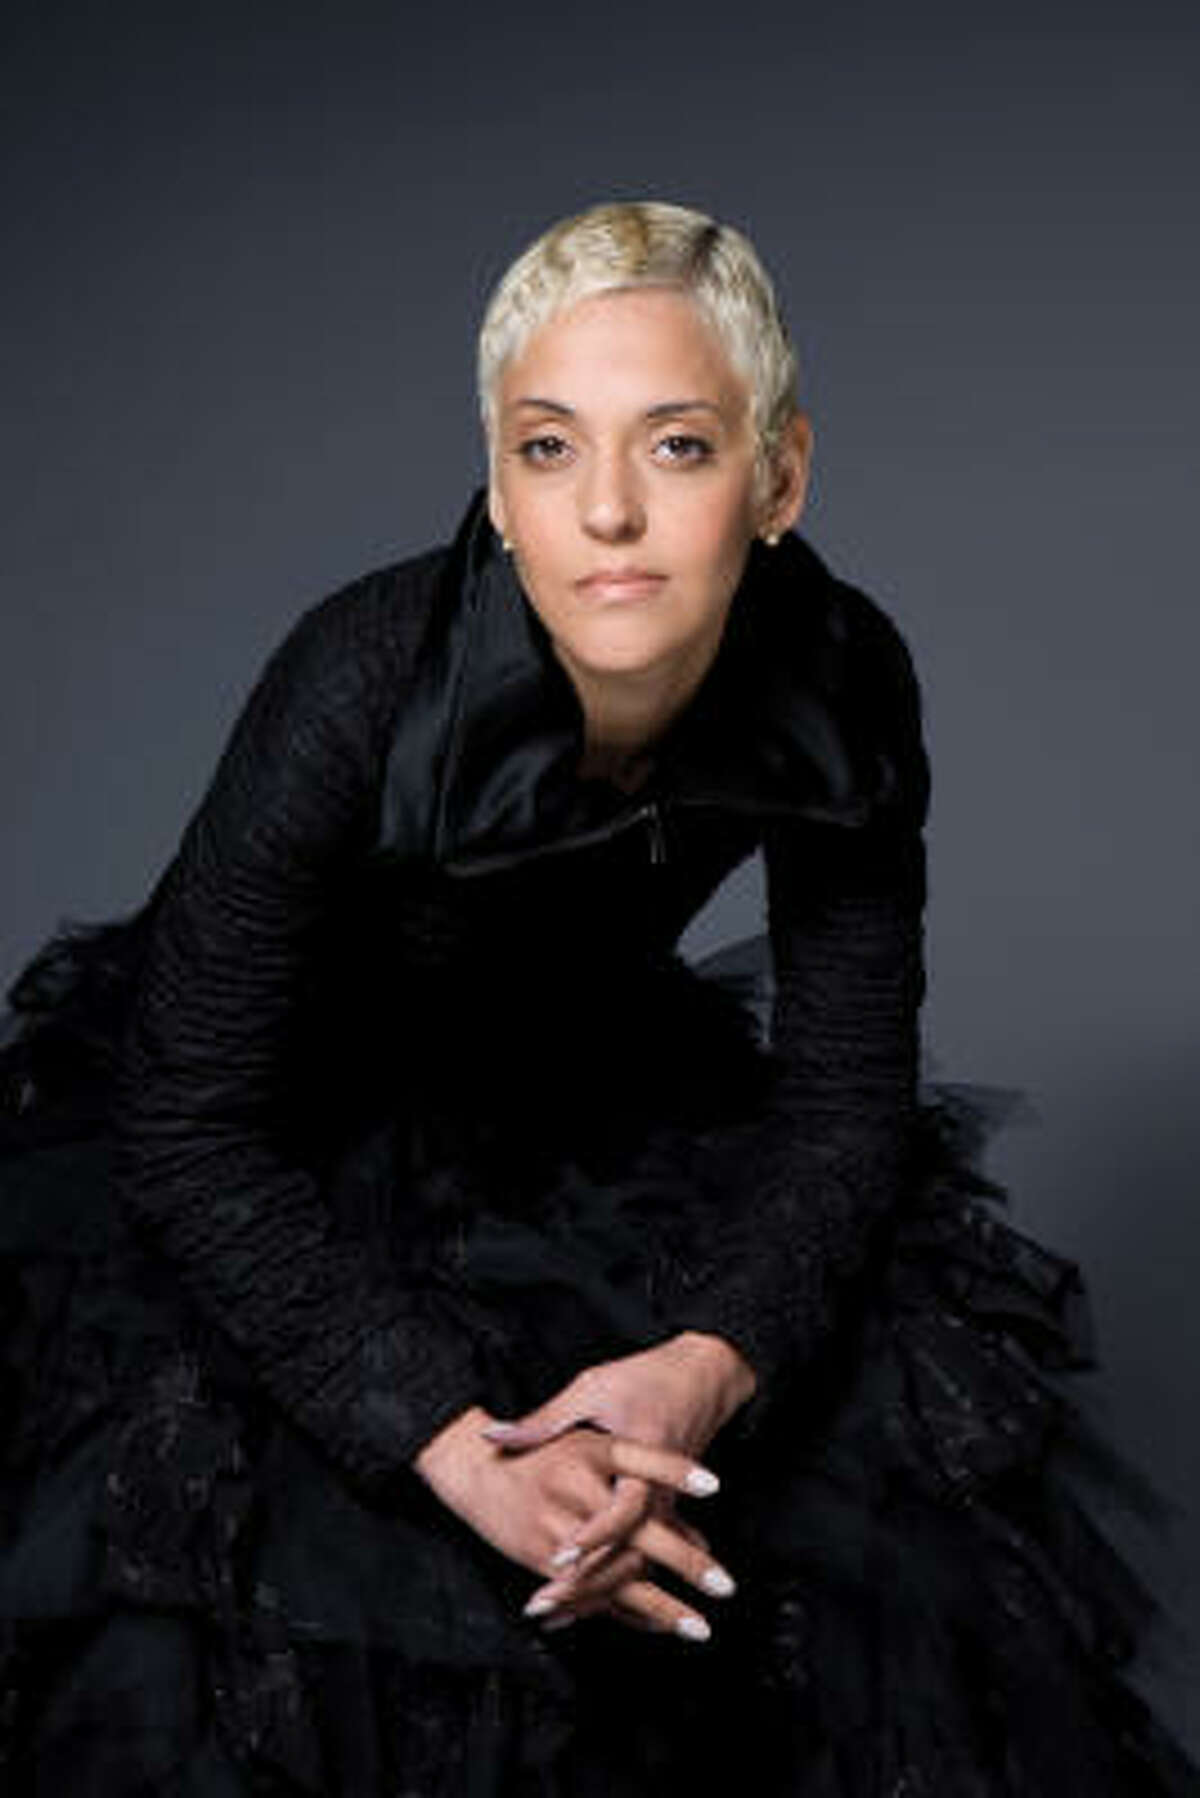 Fado singer Mariza returns to Houston to perform hits from her Latin Grammy-nominated, triple platinum album Terra, which blends flamenco and morna (a genre of music from Cape Verde), as well as jazz and folk. Presented by the Society for Performing Arts at 8 tonight at Jones Hall, 615 Louisiana; Tickets: $20-$45.